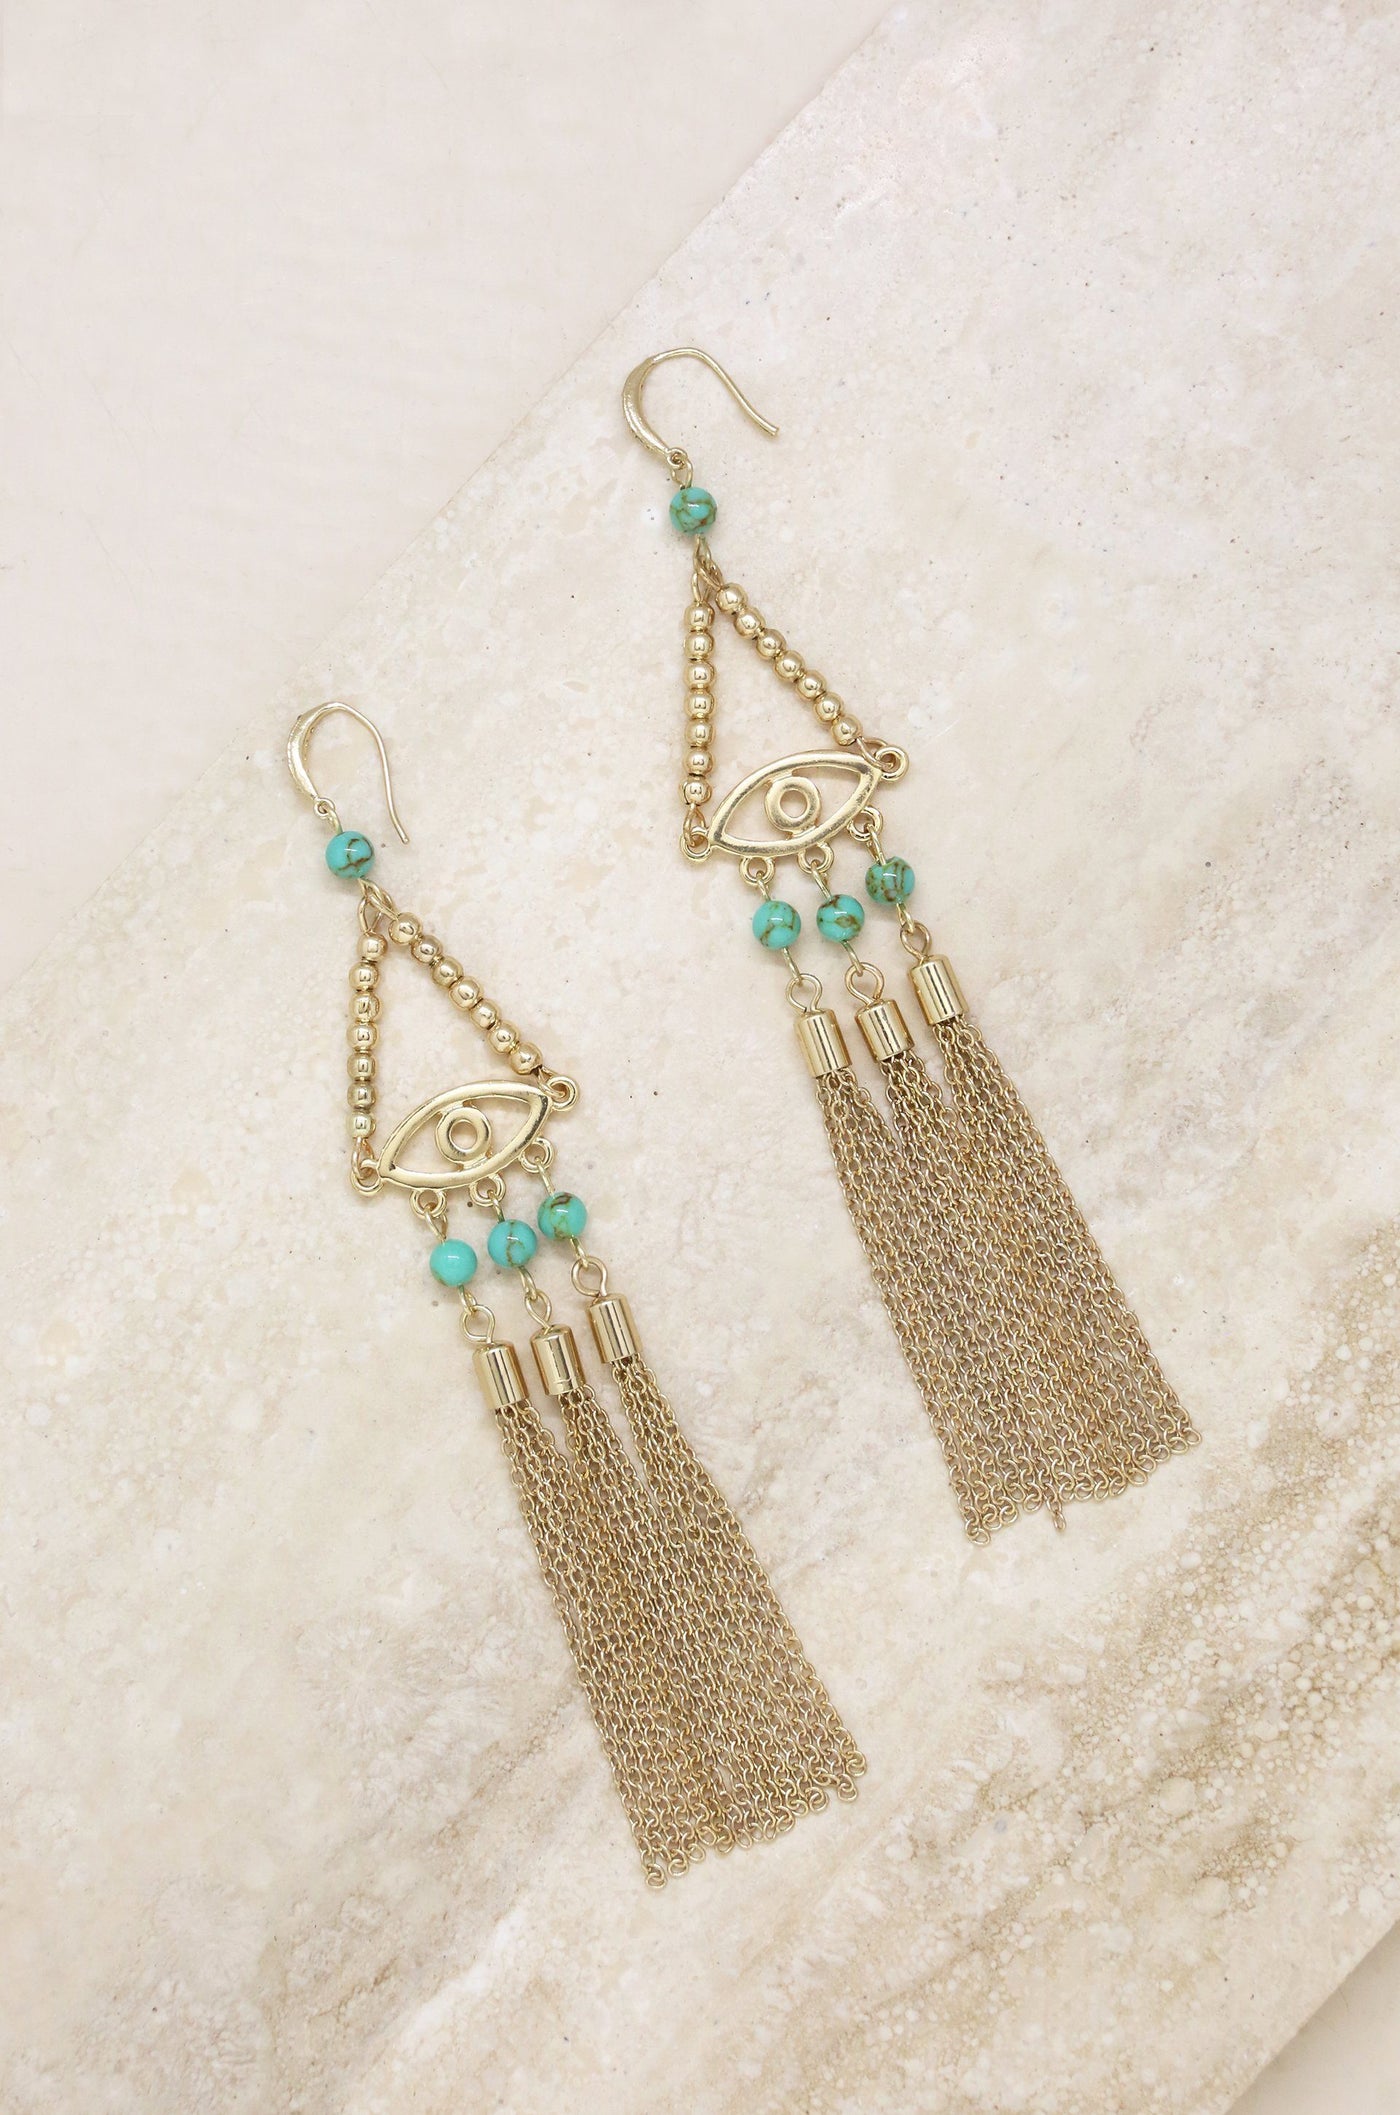 All Eyes On Me Earrings in Turquoise and Gold-Dakotas Boutique